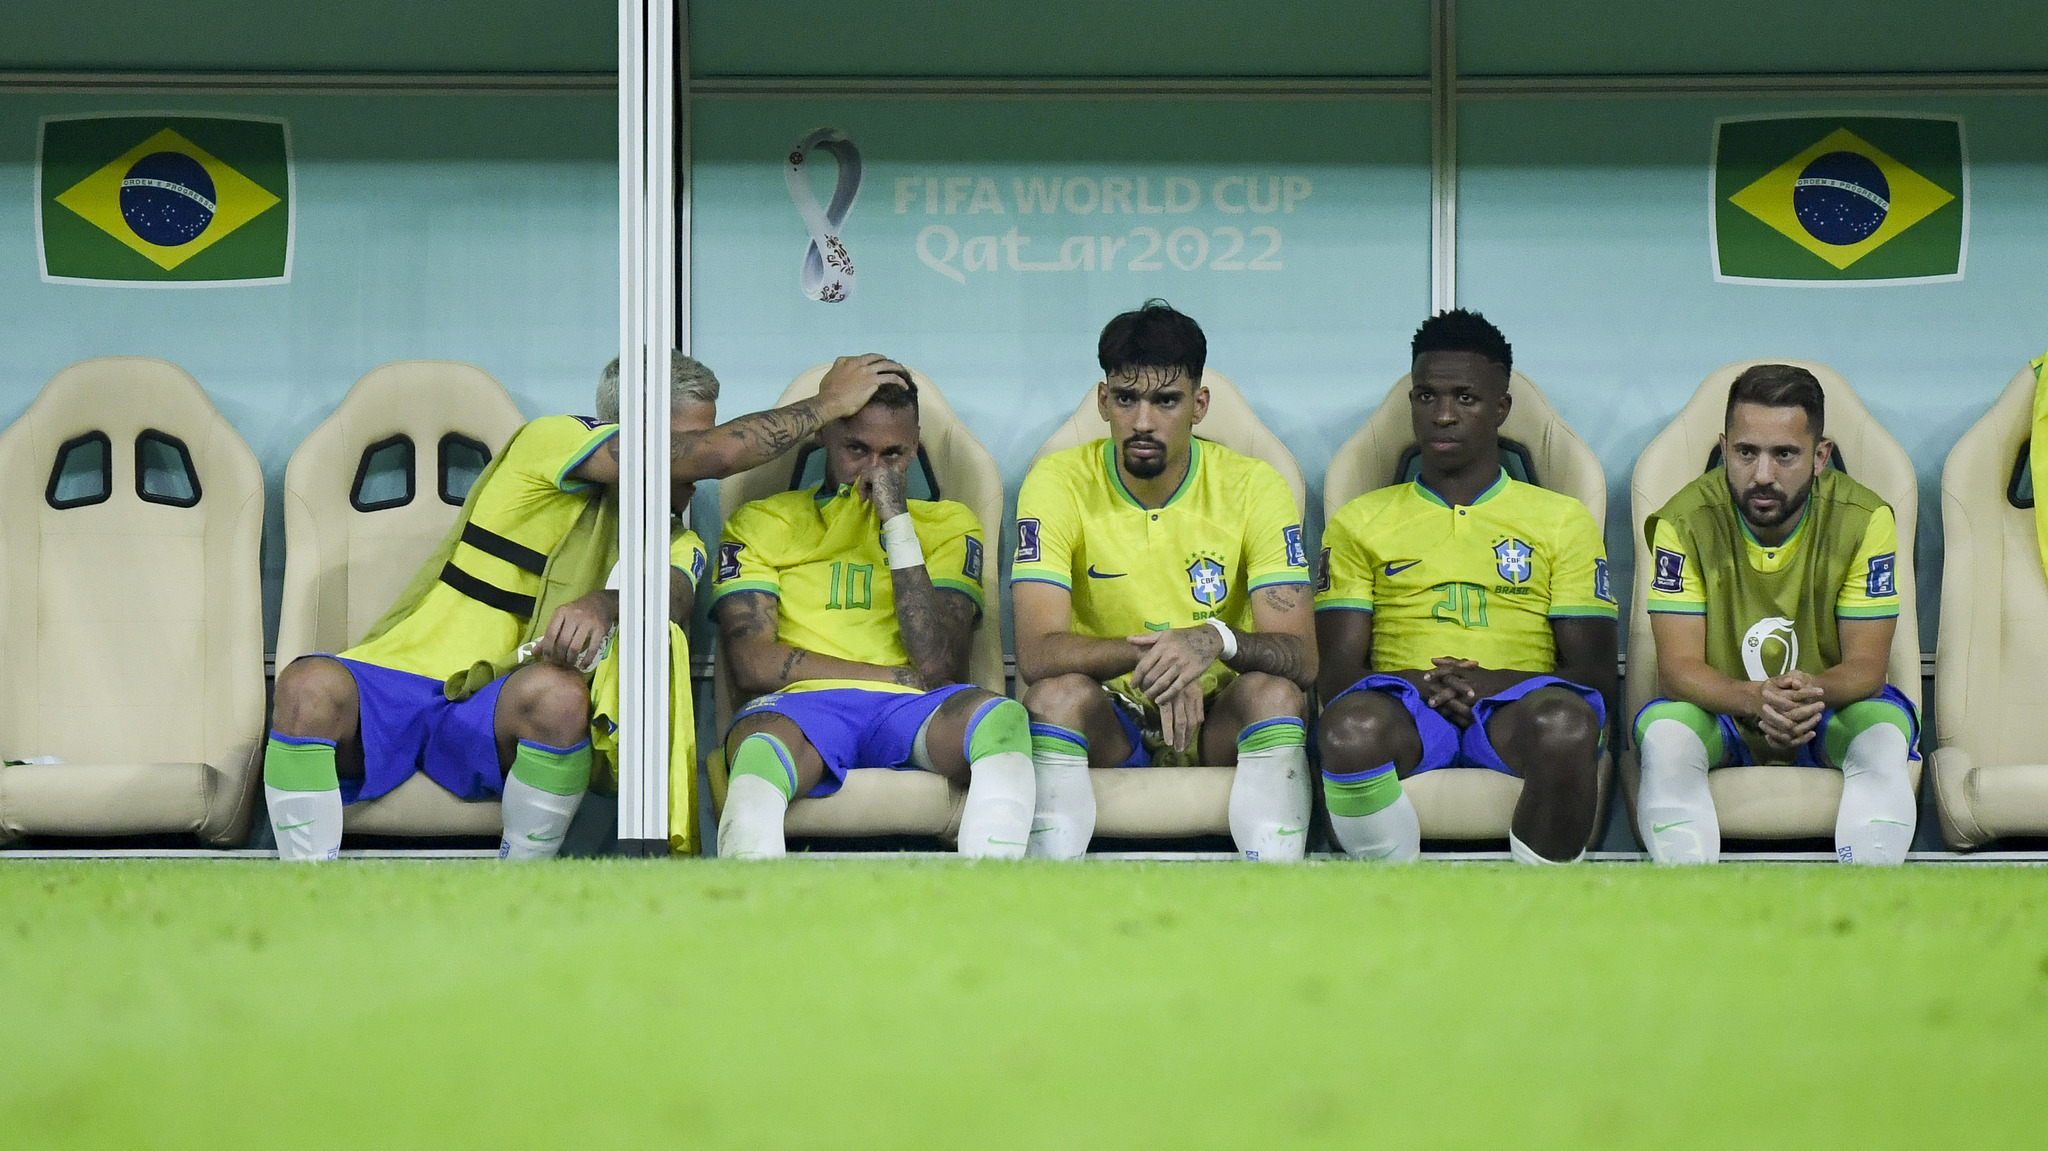 LUSAIL CITY, QATAR - NOVEMBER 24: Richarlison of Brazil,  lt;HIT gt;Neymar lt;/HIT gt; of Brazil, Lucas Paqueta of Brazil, Vinicius Junior of Brazil and Pedro of Brazil sitting on the bench an look on during the FIFA World Cup Qatar 2022 Group G match between Brazil and Serbia at Lusail Stadium on November 24, 2022 in Lusail City, Qatar. (Photo by Matteo Ciambelli/DeFodi Images via Getty Images)